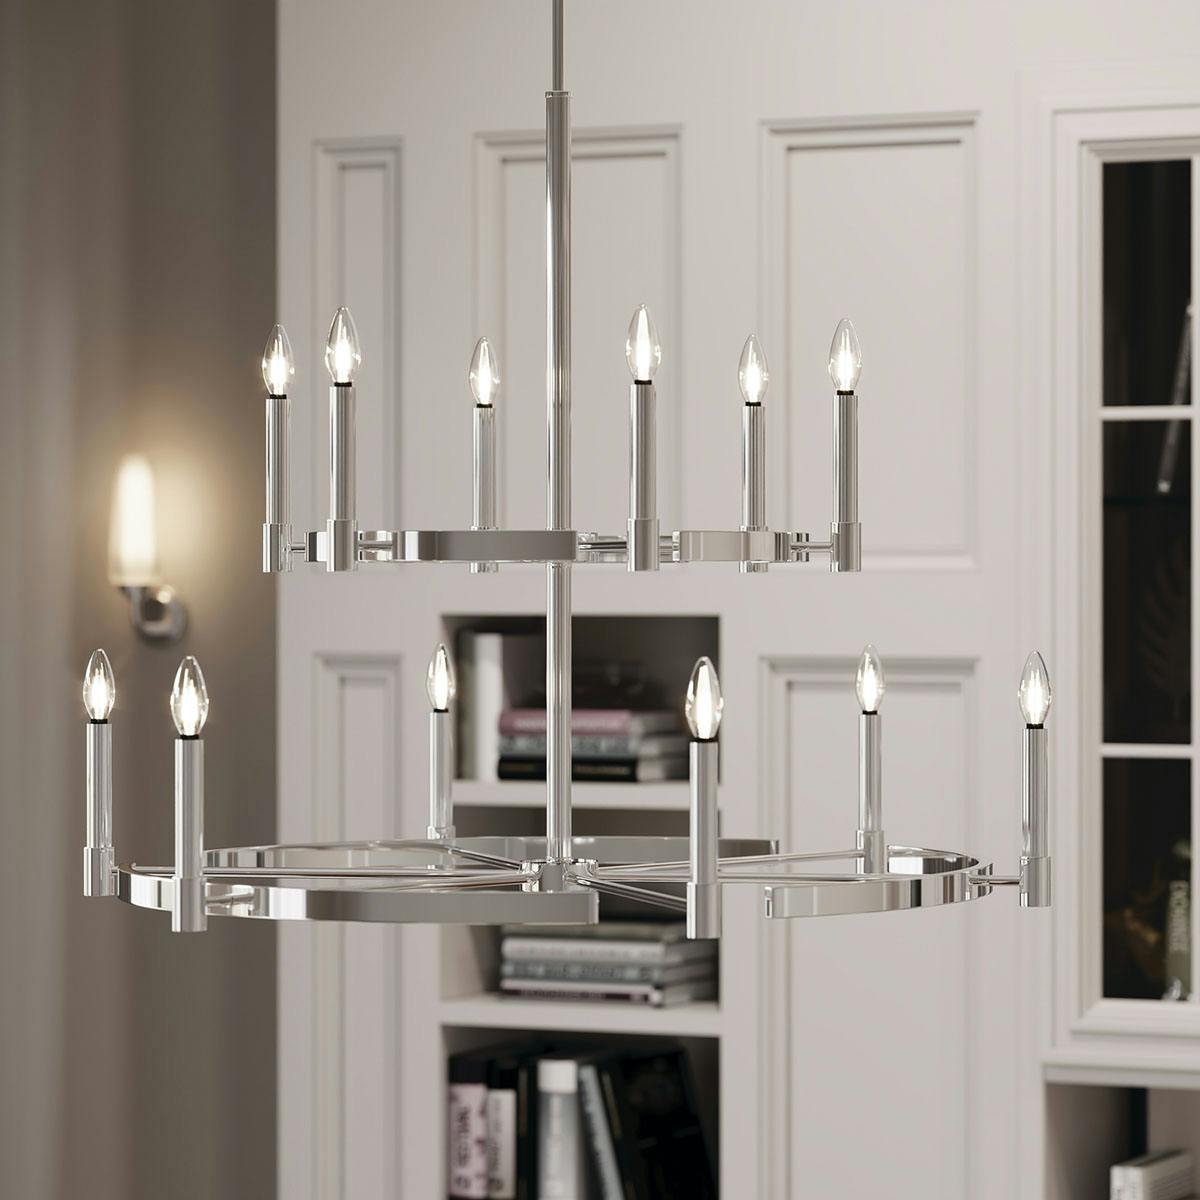 Day time dining room image featuring Tolani chandelier 52428PN